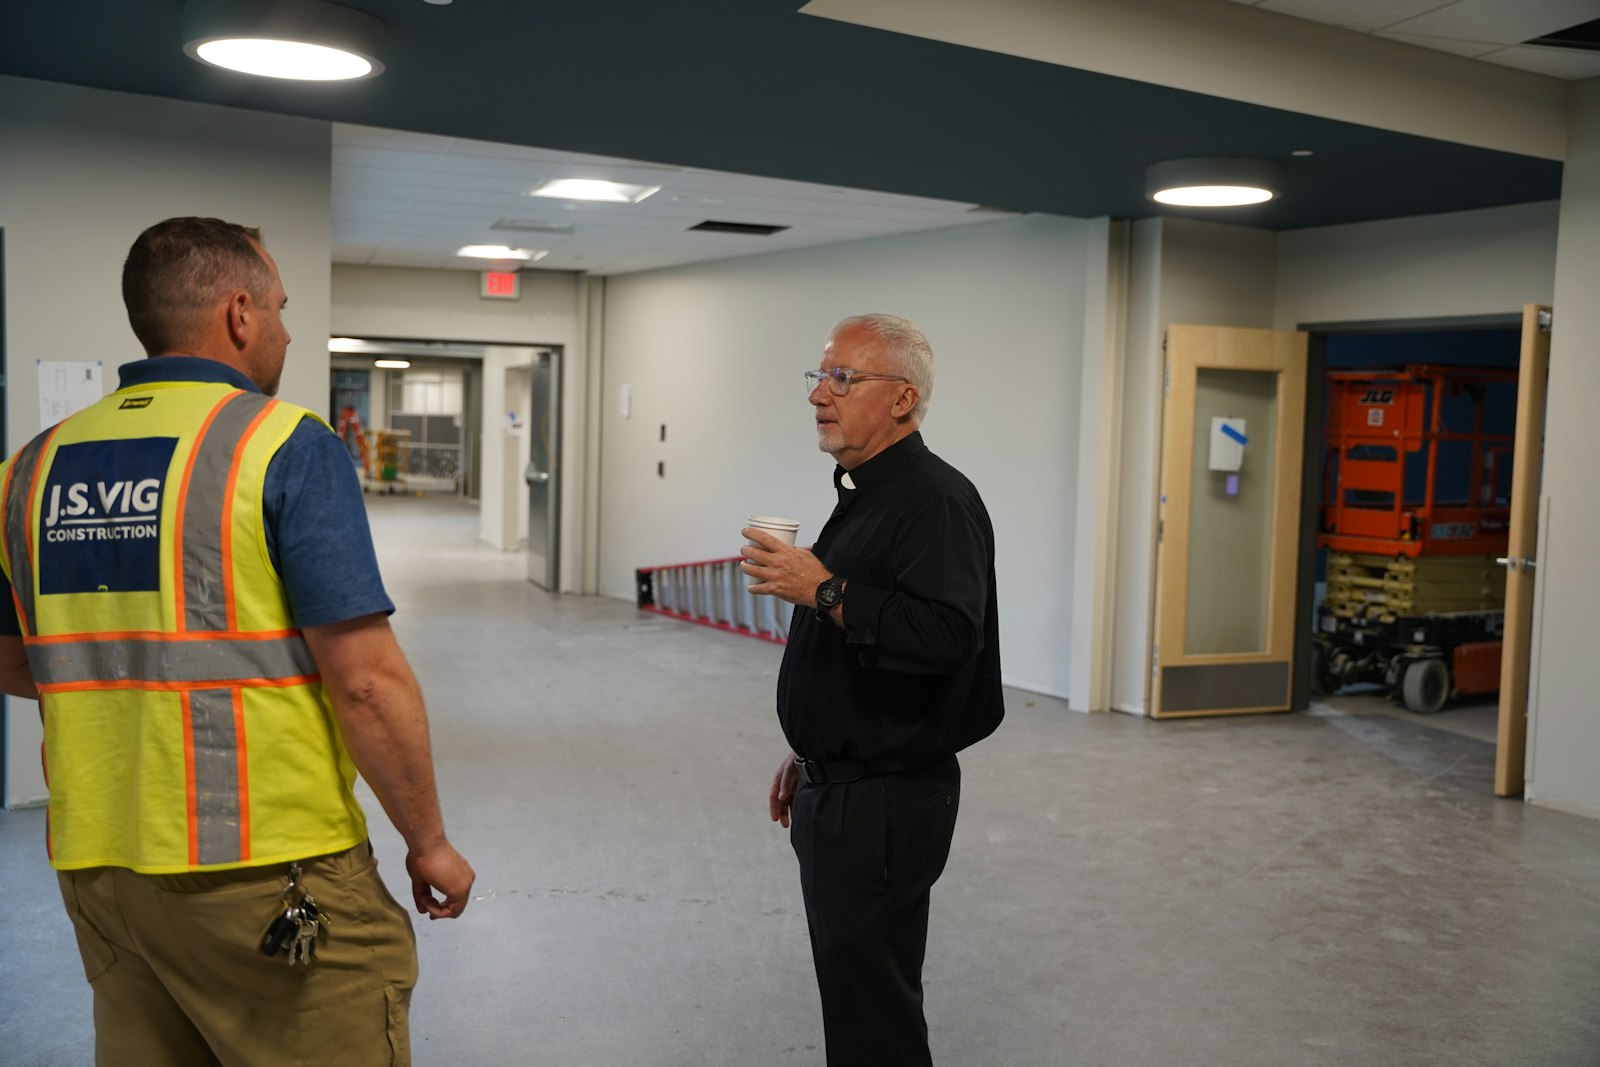 J.S. Vig Construction is the main contractor for the Pope Francis Center's transitional housing facility. Fr. McCabe has high praise for the center's construction partners, who have delivered the facility on time and under budget.